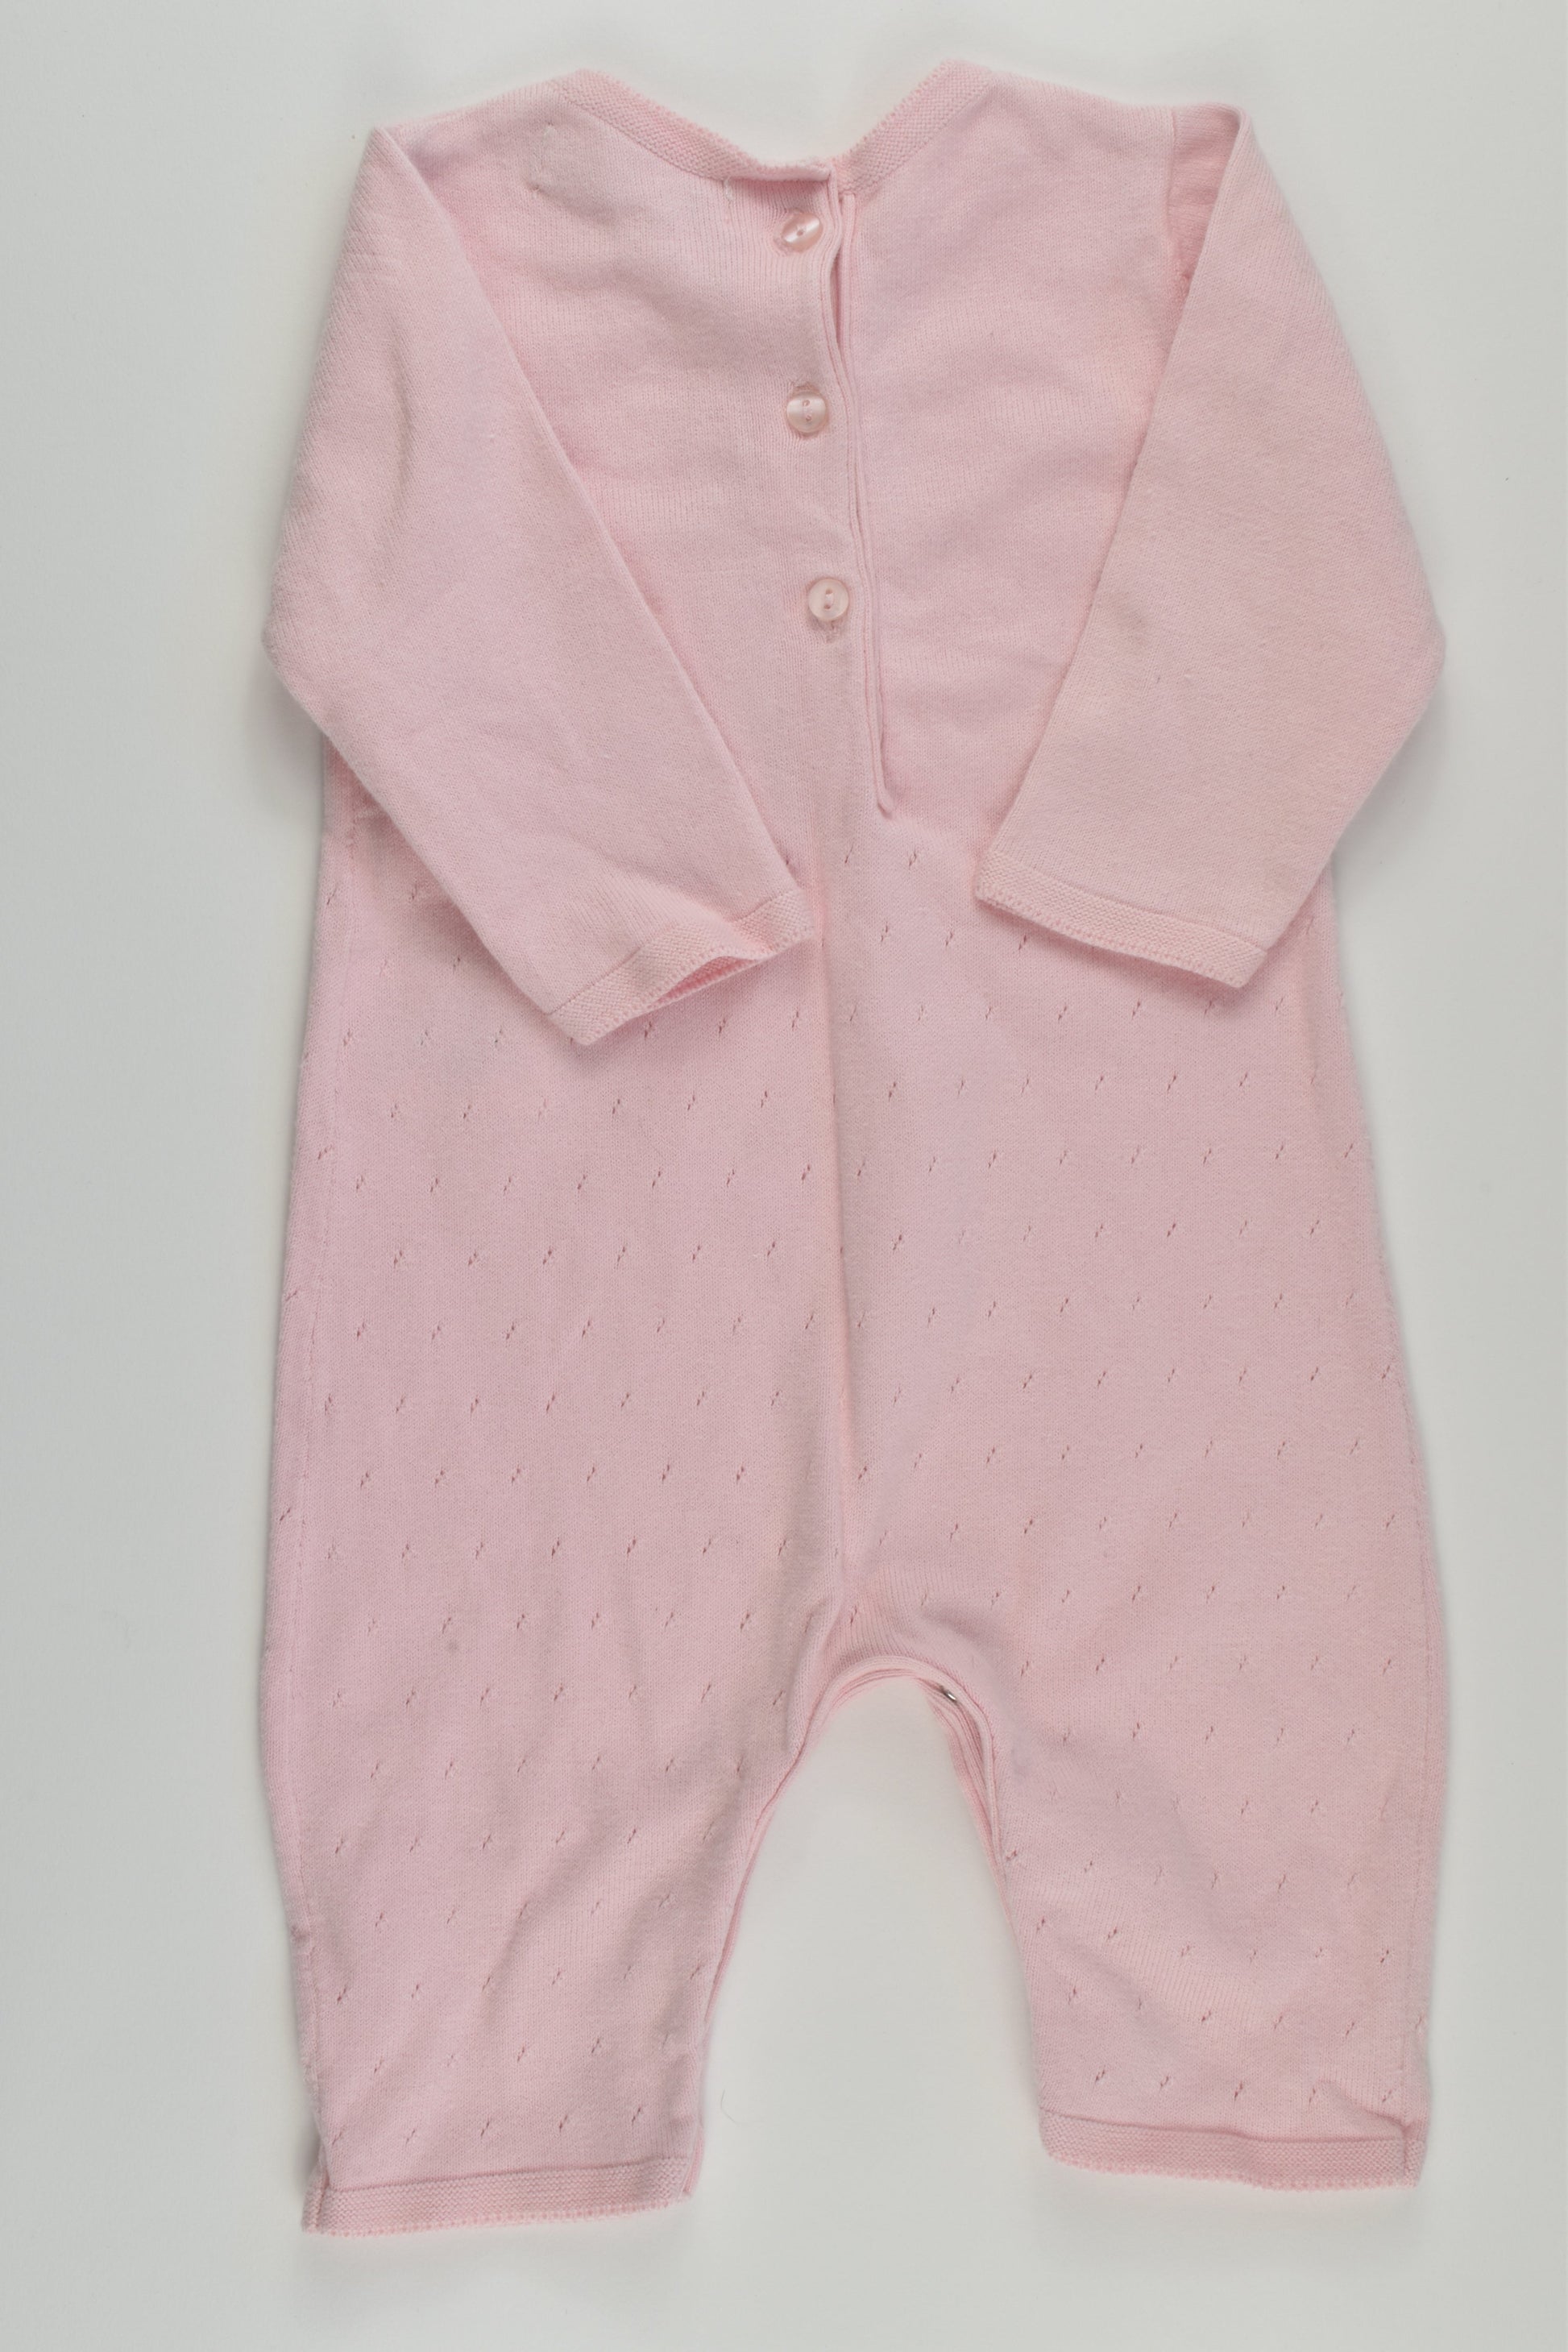 Ollie's Place Size 000 Knit Romper